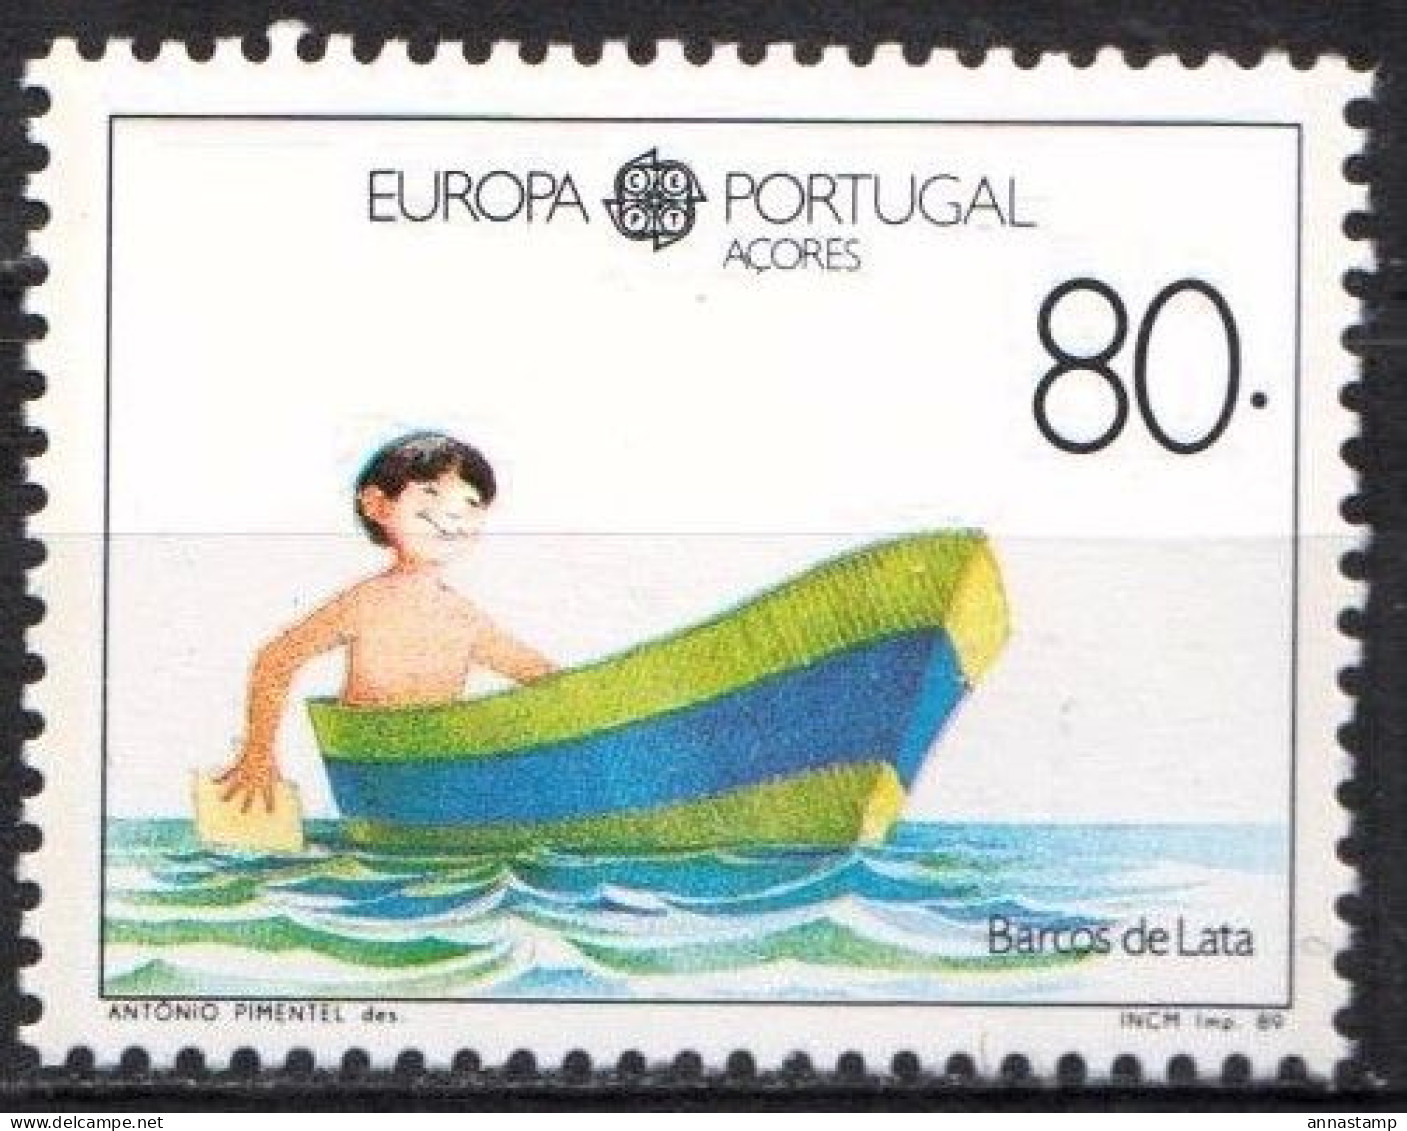 Azores MNH Stamp - 1989